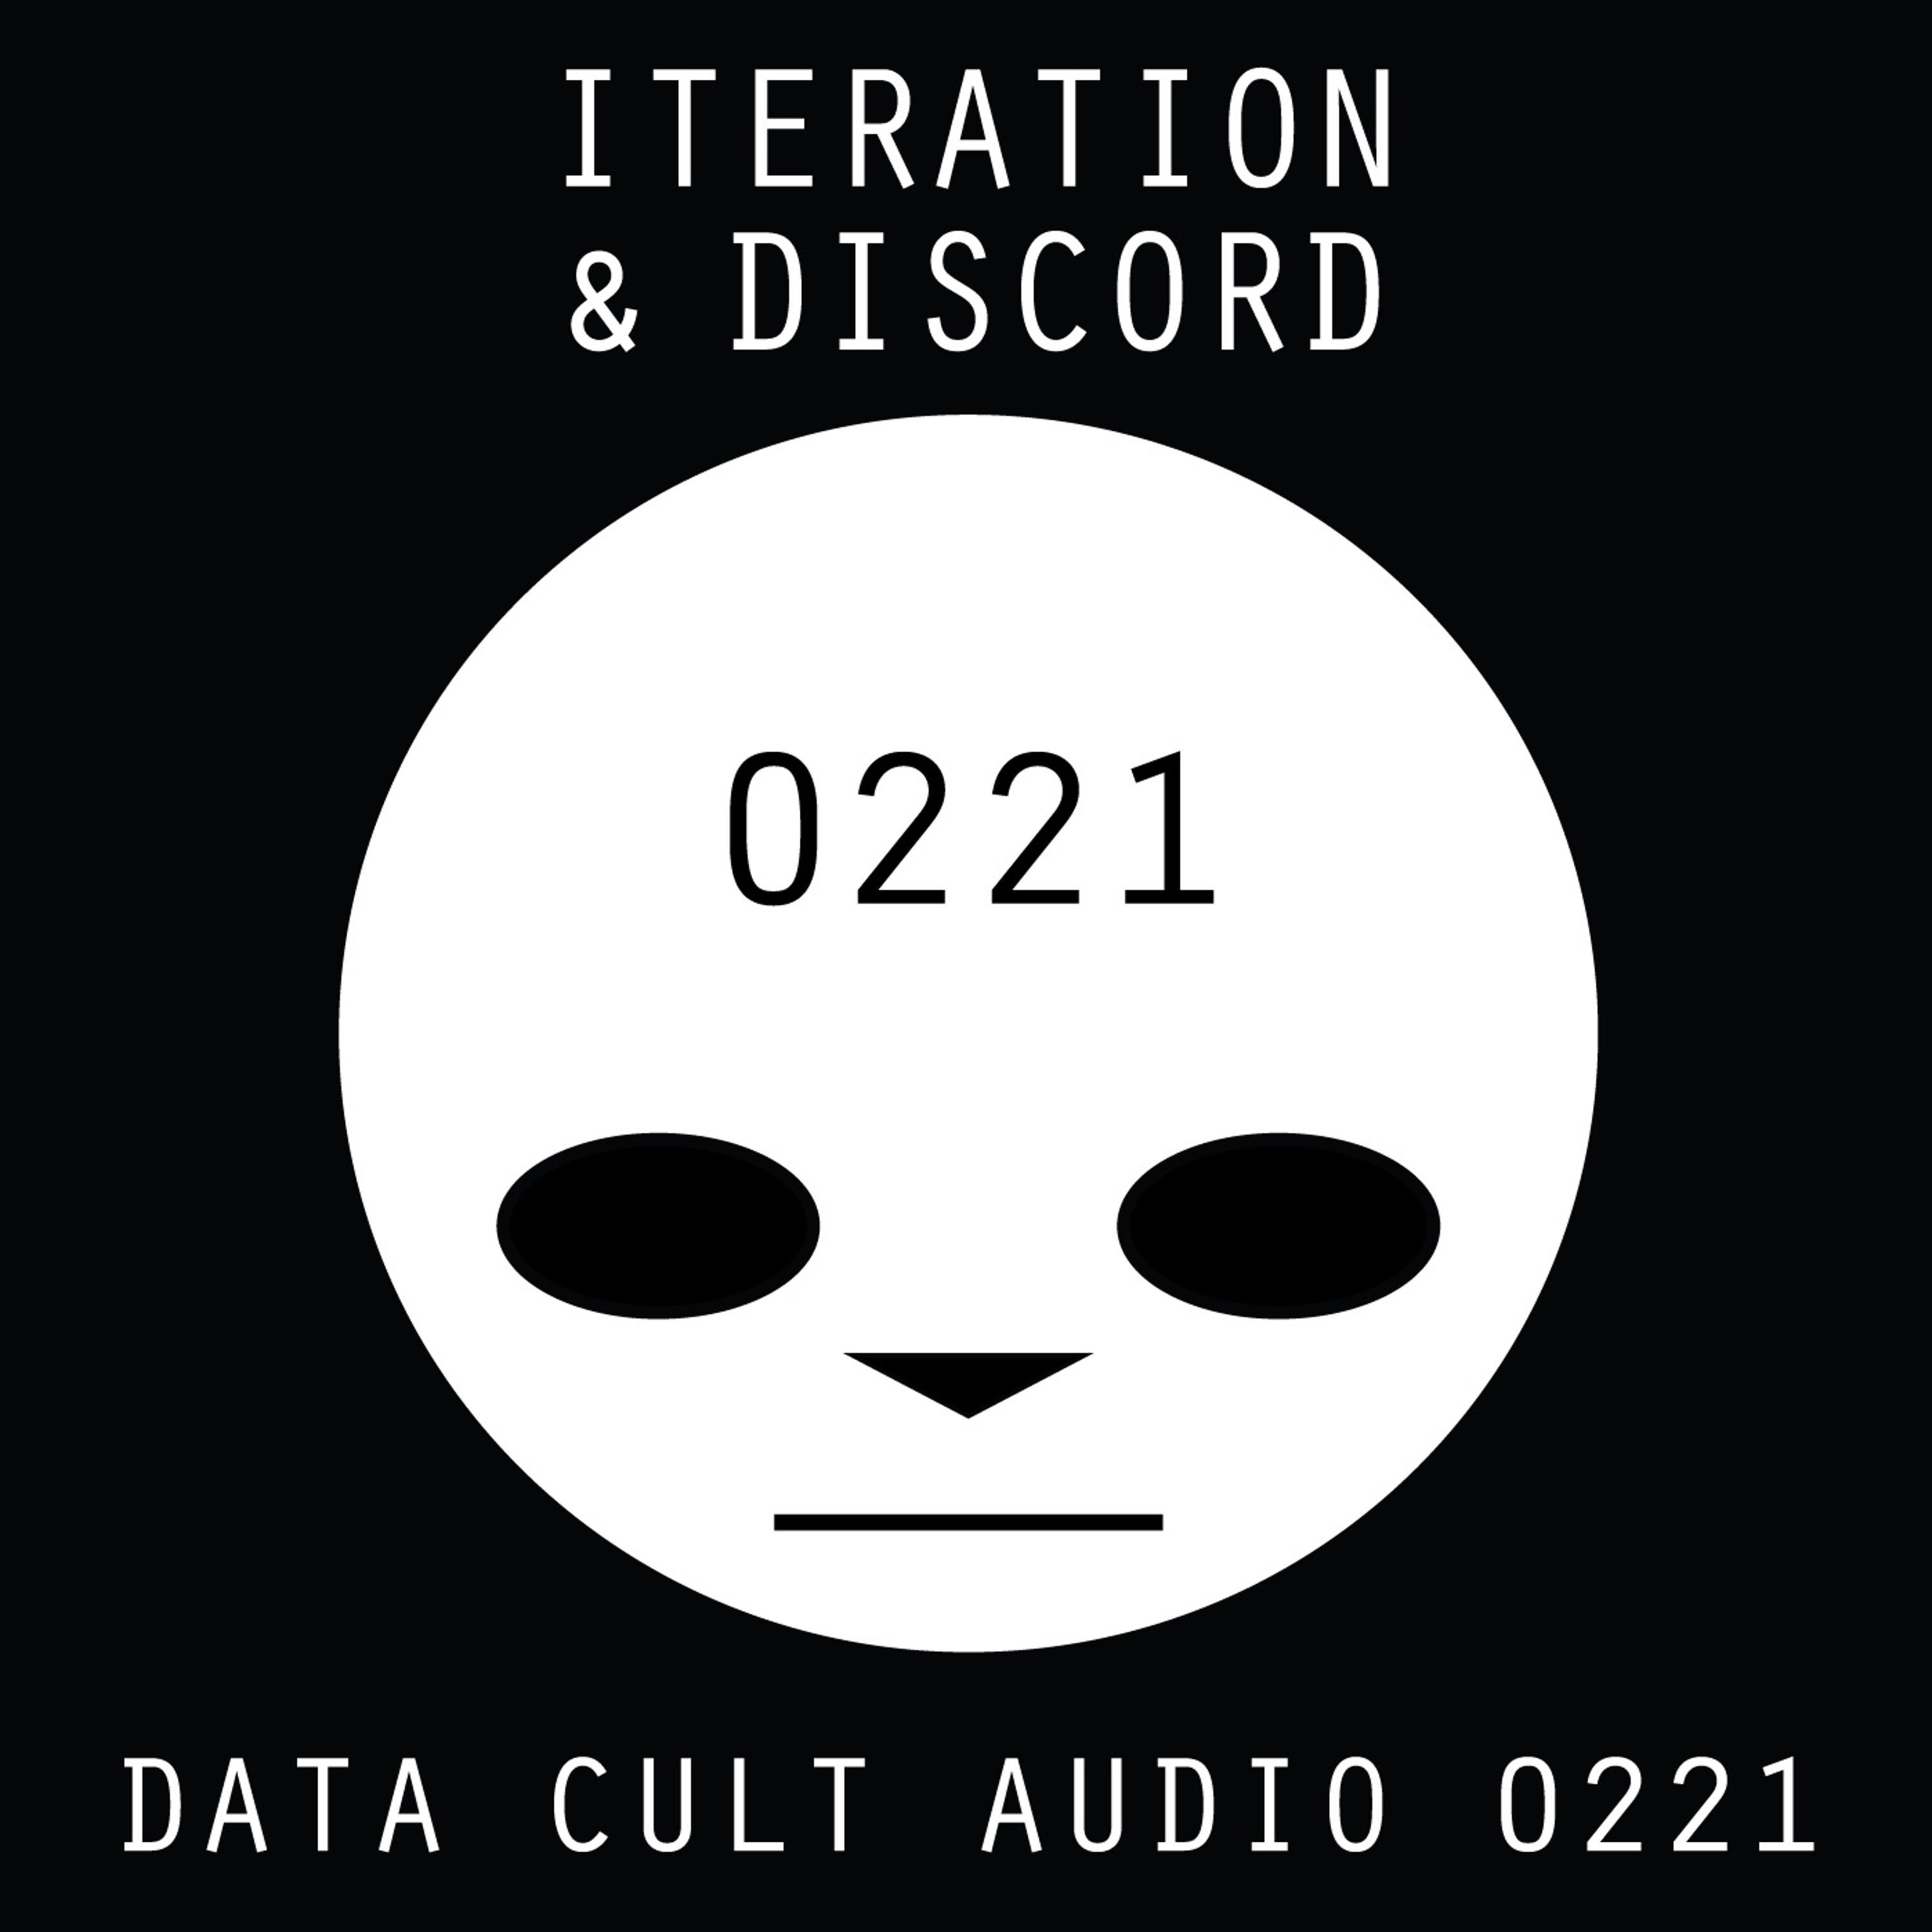 Data Cult Audio 0221 - Iteration And Discord